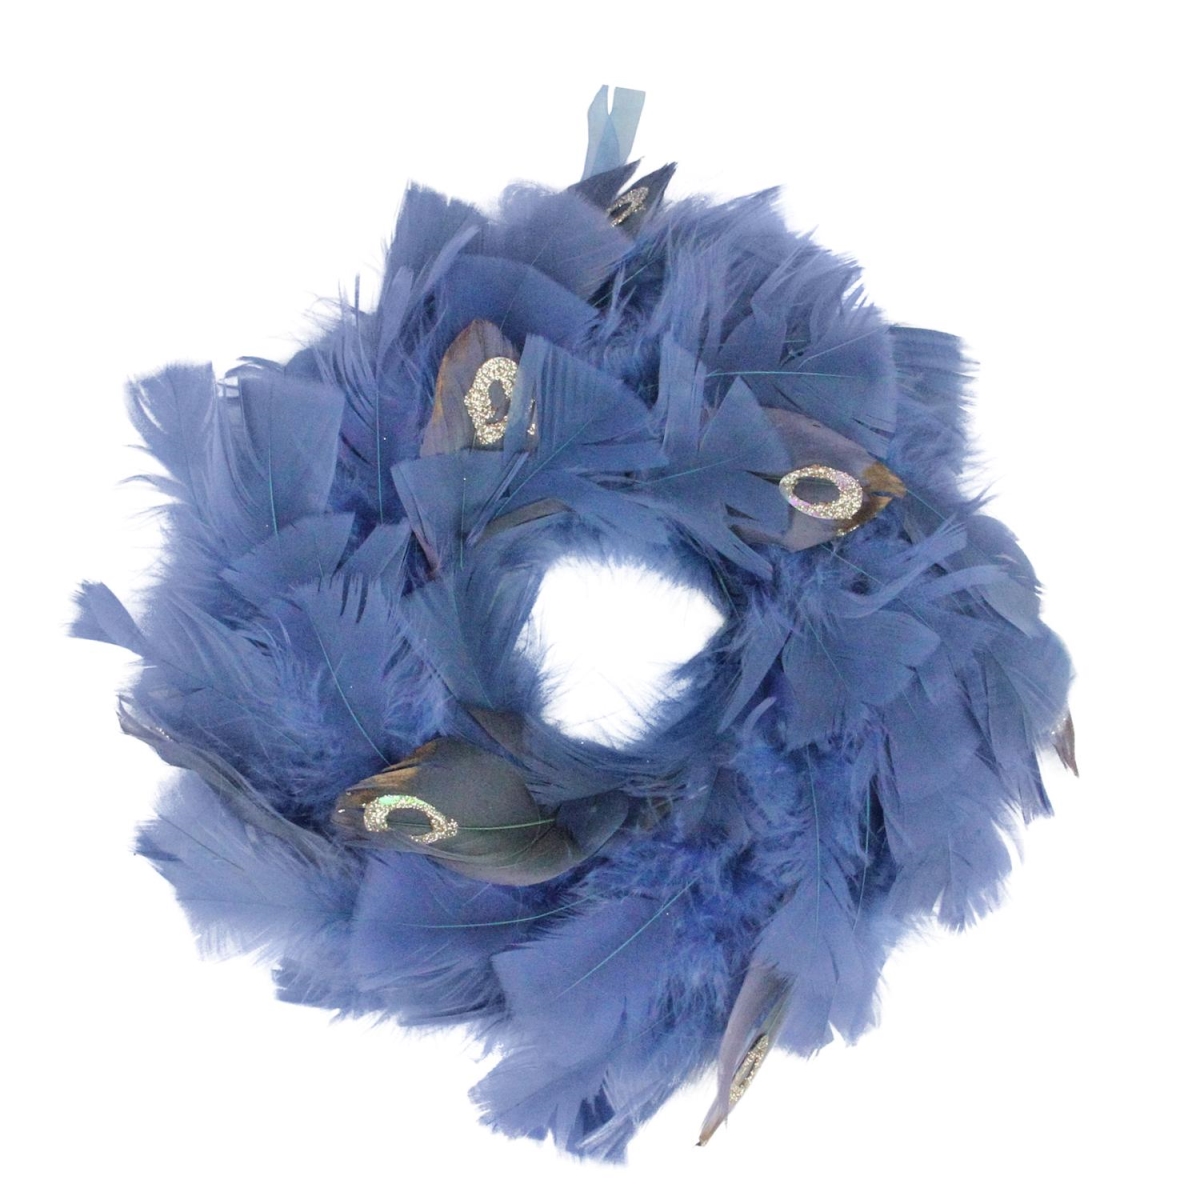 32637793 10 In. Regal Peacock Embellished Blue Feather Artificial Christmas Wreath - Unlit